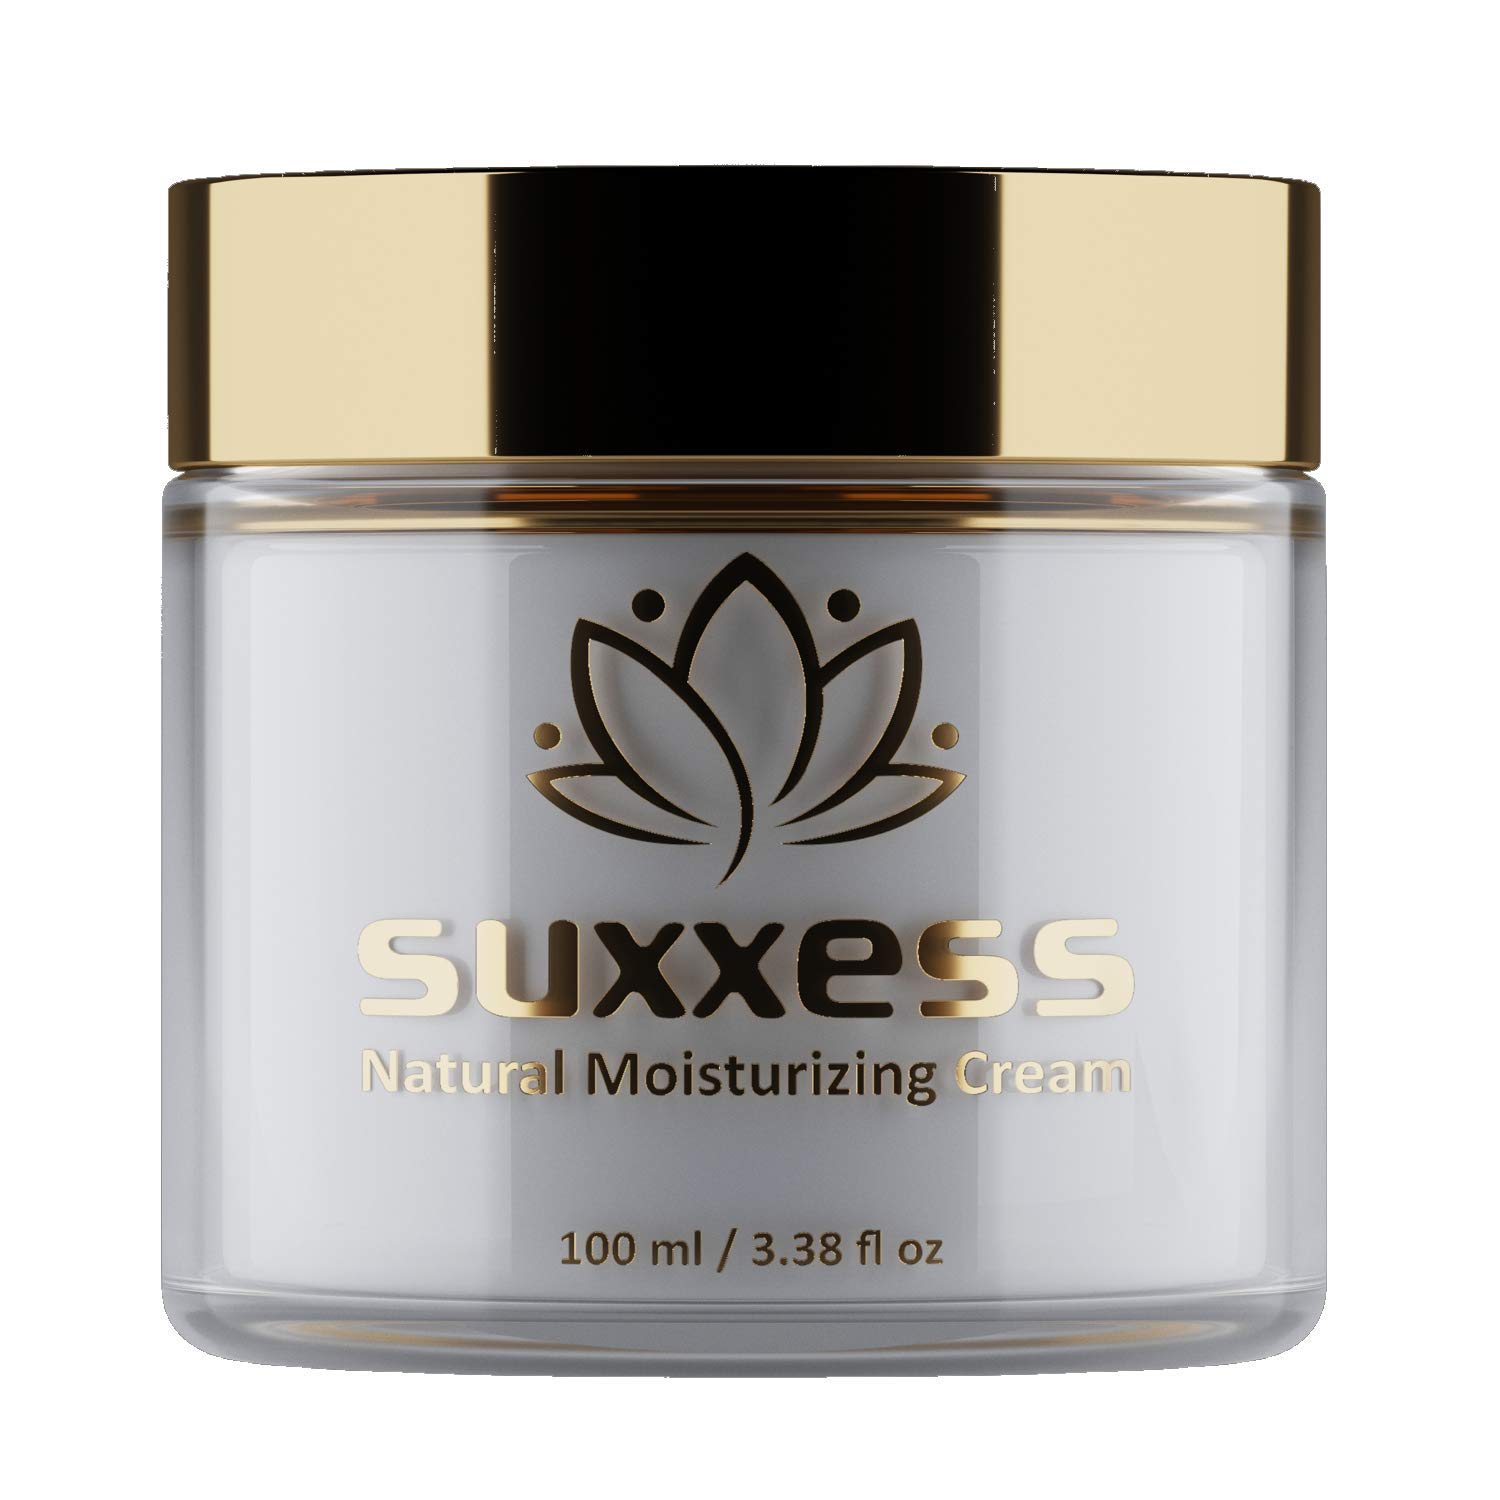 Book Cover Natural Moisturizing Cream with Hyaluronic Acid and Collagen Natural ingredients and extracts, Alcohol Free Korean made and anti-aging, K-Beauty facial moisturizer for all skin types By Suxxess